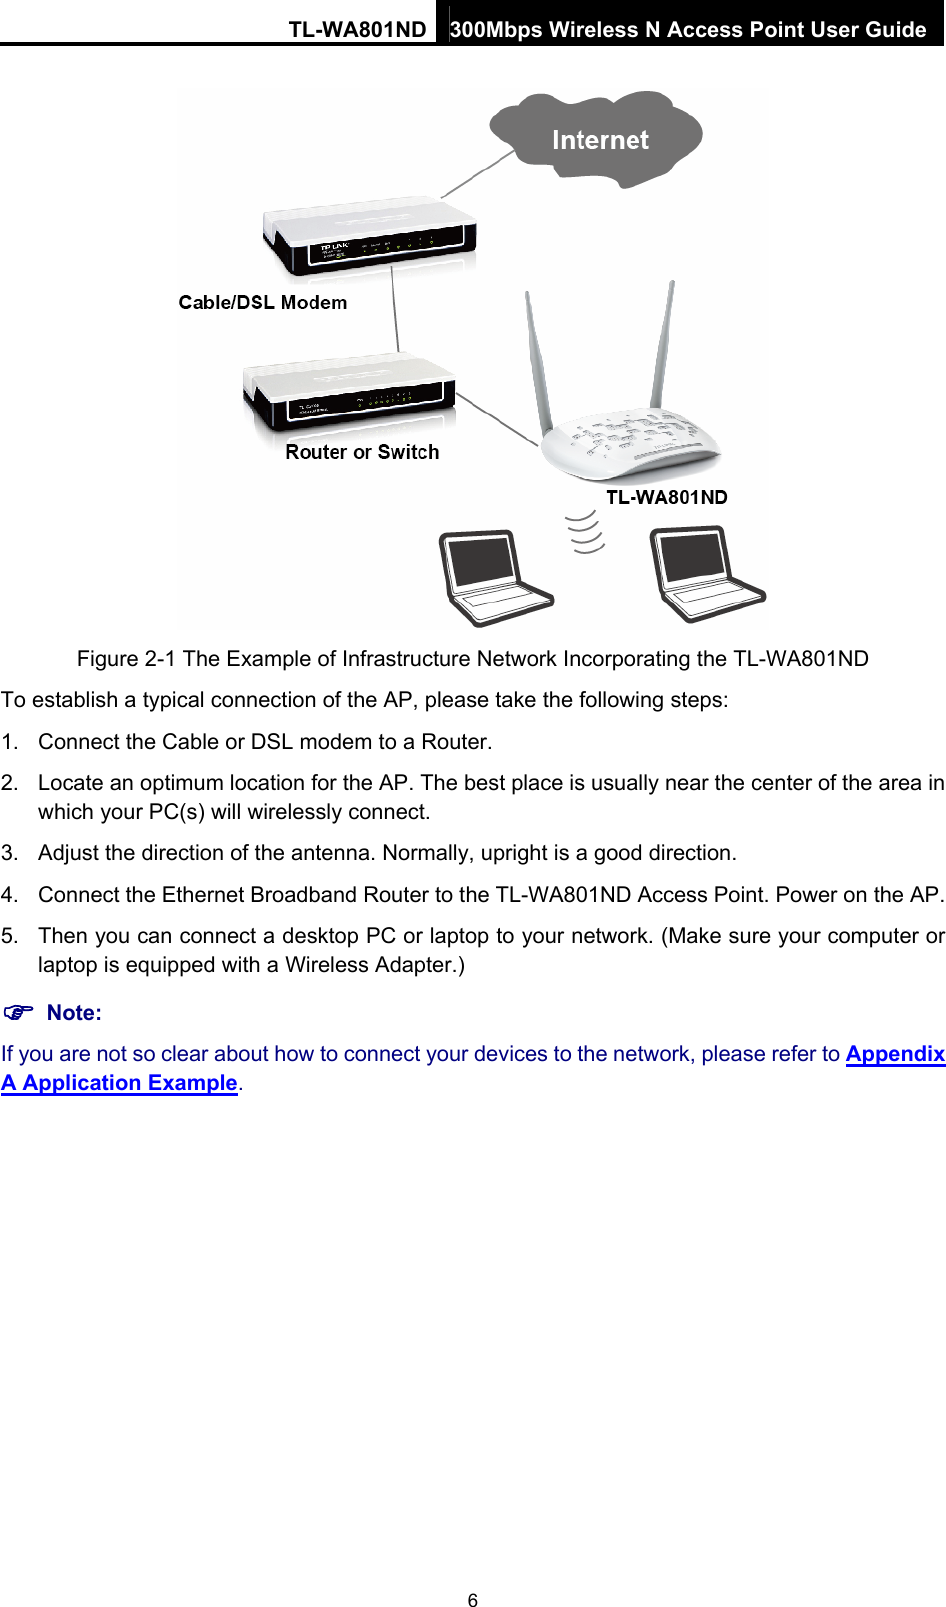 TL-WA801ND 300Mbps Wireless N Access Point User Guide  Figure 2-1 The Example of Infrastructure Network Incorporating the TL-WA801ND To establish a typical connection of the AP, please take the following steps: 1.  Connect the Cable or DSL modem to a Router. 2.  Locate an optimum location for the AP. The best place is usually near the center of the area in which your PC(s) will wirelessly connect. 3.  Adjust the direction of the antenna. Normally, upright is a good direction. 4.  Connect the Ethernet Broadband Router to the TL-WA801ND Access Point. Power on the AP. 5.  Then you can connect a desktop PC or laptop to your network. (Make sure your computer or laptop is equipped with a Wireless Adapter.)  Note: If you are not so clear about how to connect your devices to the network, please refer to Appendix A Application Example. 6 